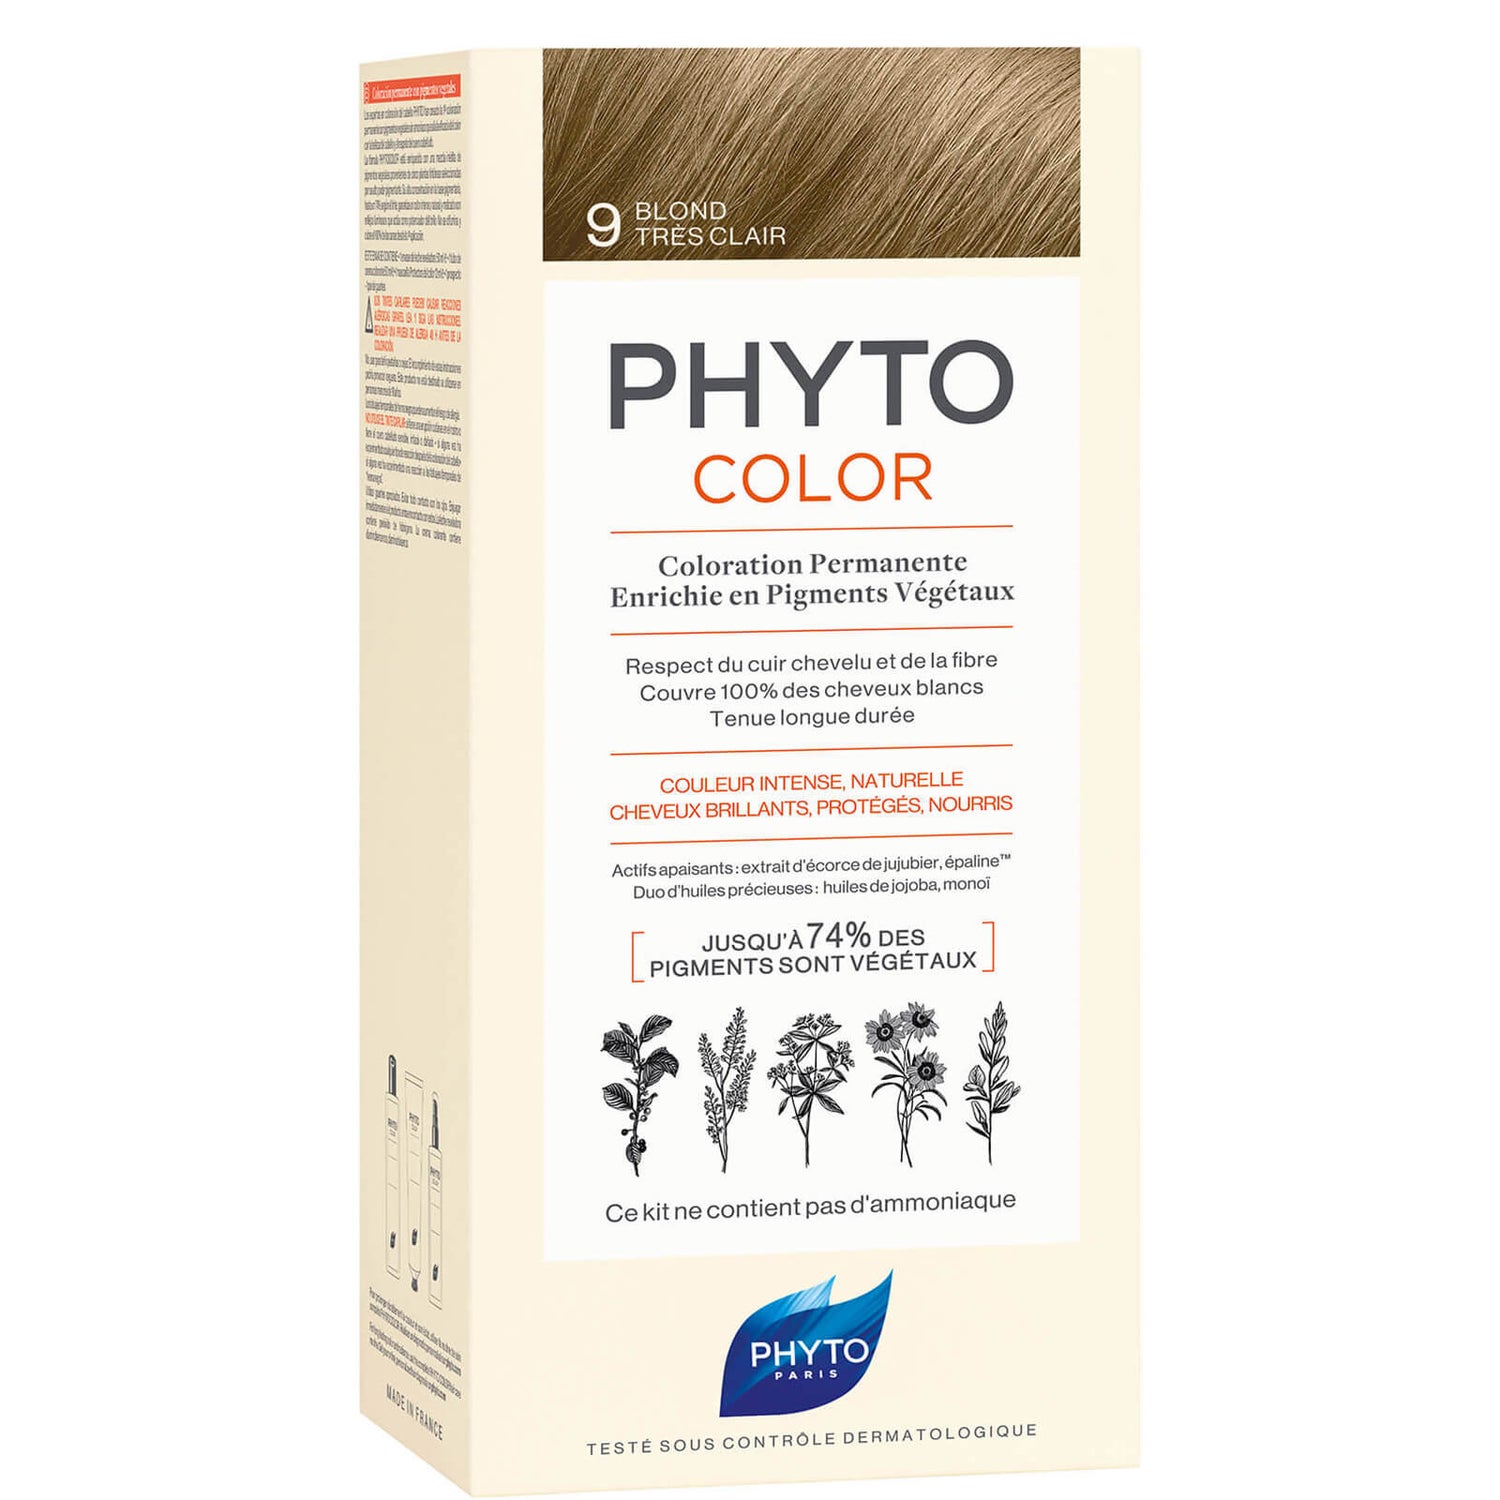 Phyto Hair Colour by Phytocolor - 9 Very Light Blonde 180g